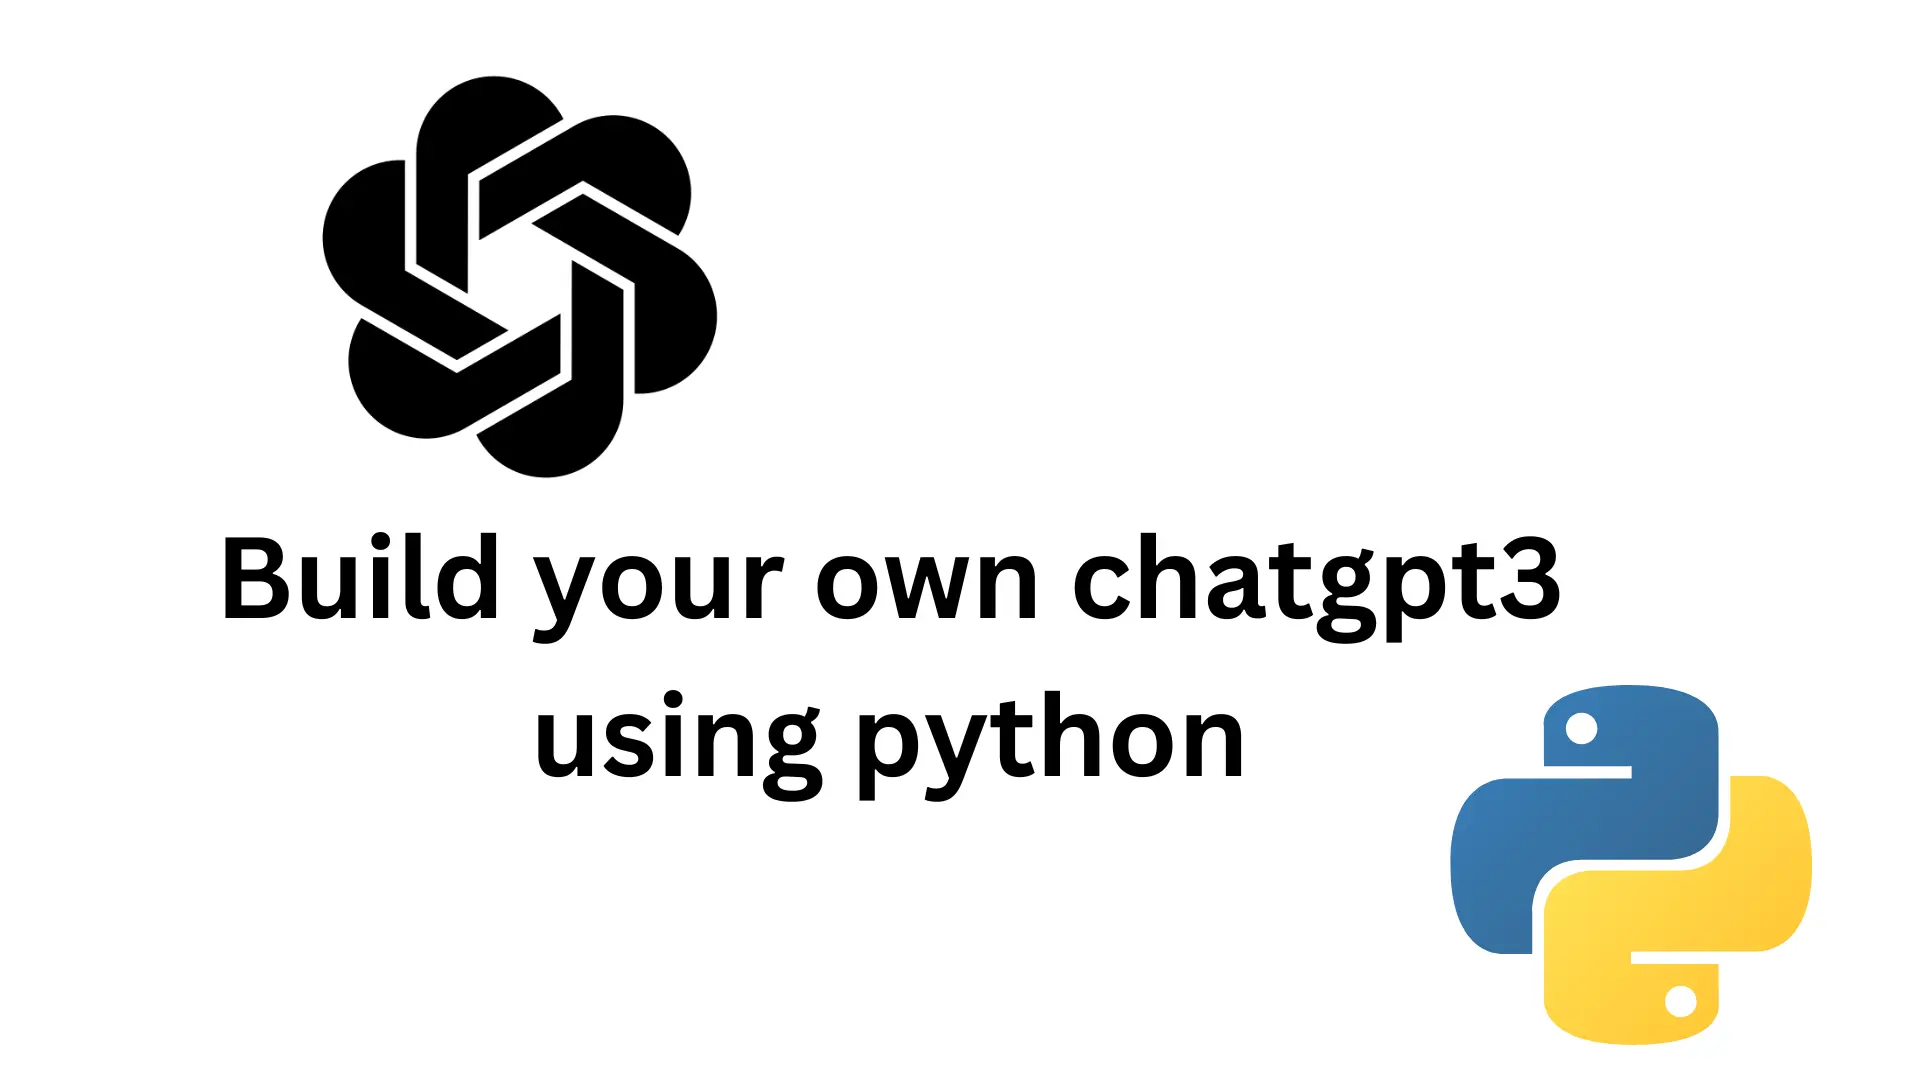 Build-your-own-chatgpt3-using-python.webp